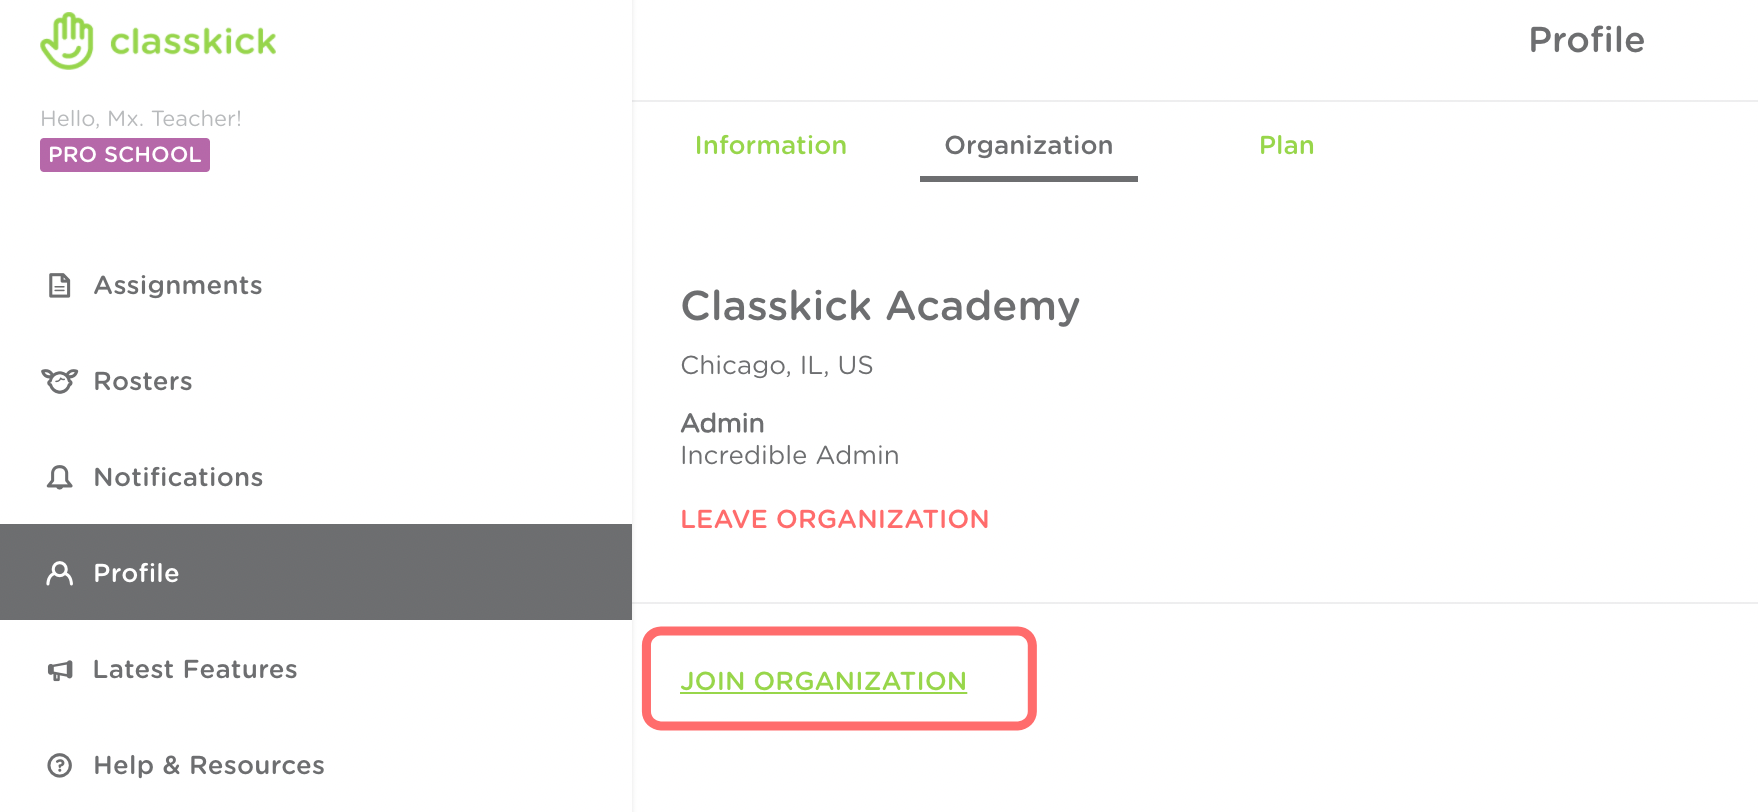 Teacher Profile and Organization tab is displayed. The Join Organization link is highlighted. This is where teachers click to manually search and join the correct organization.